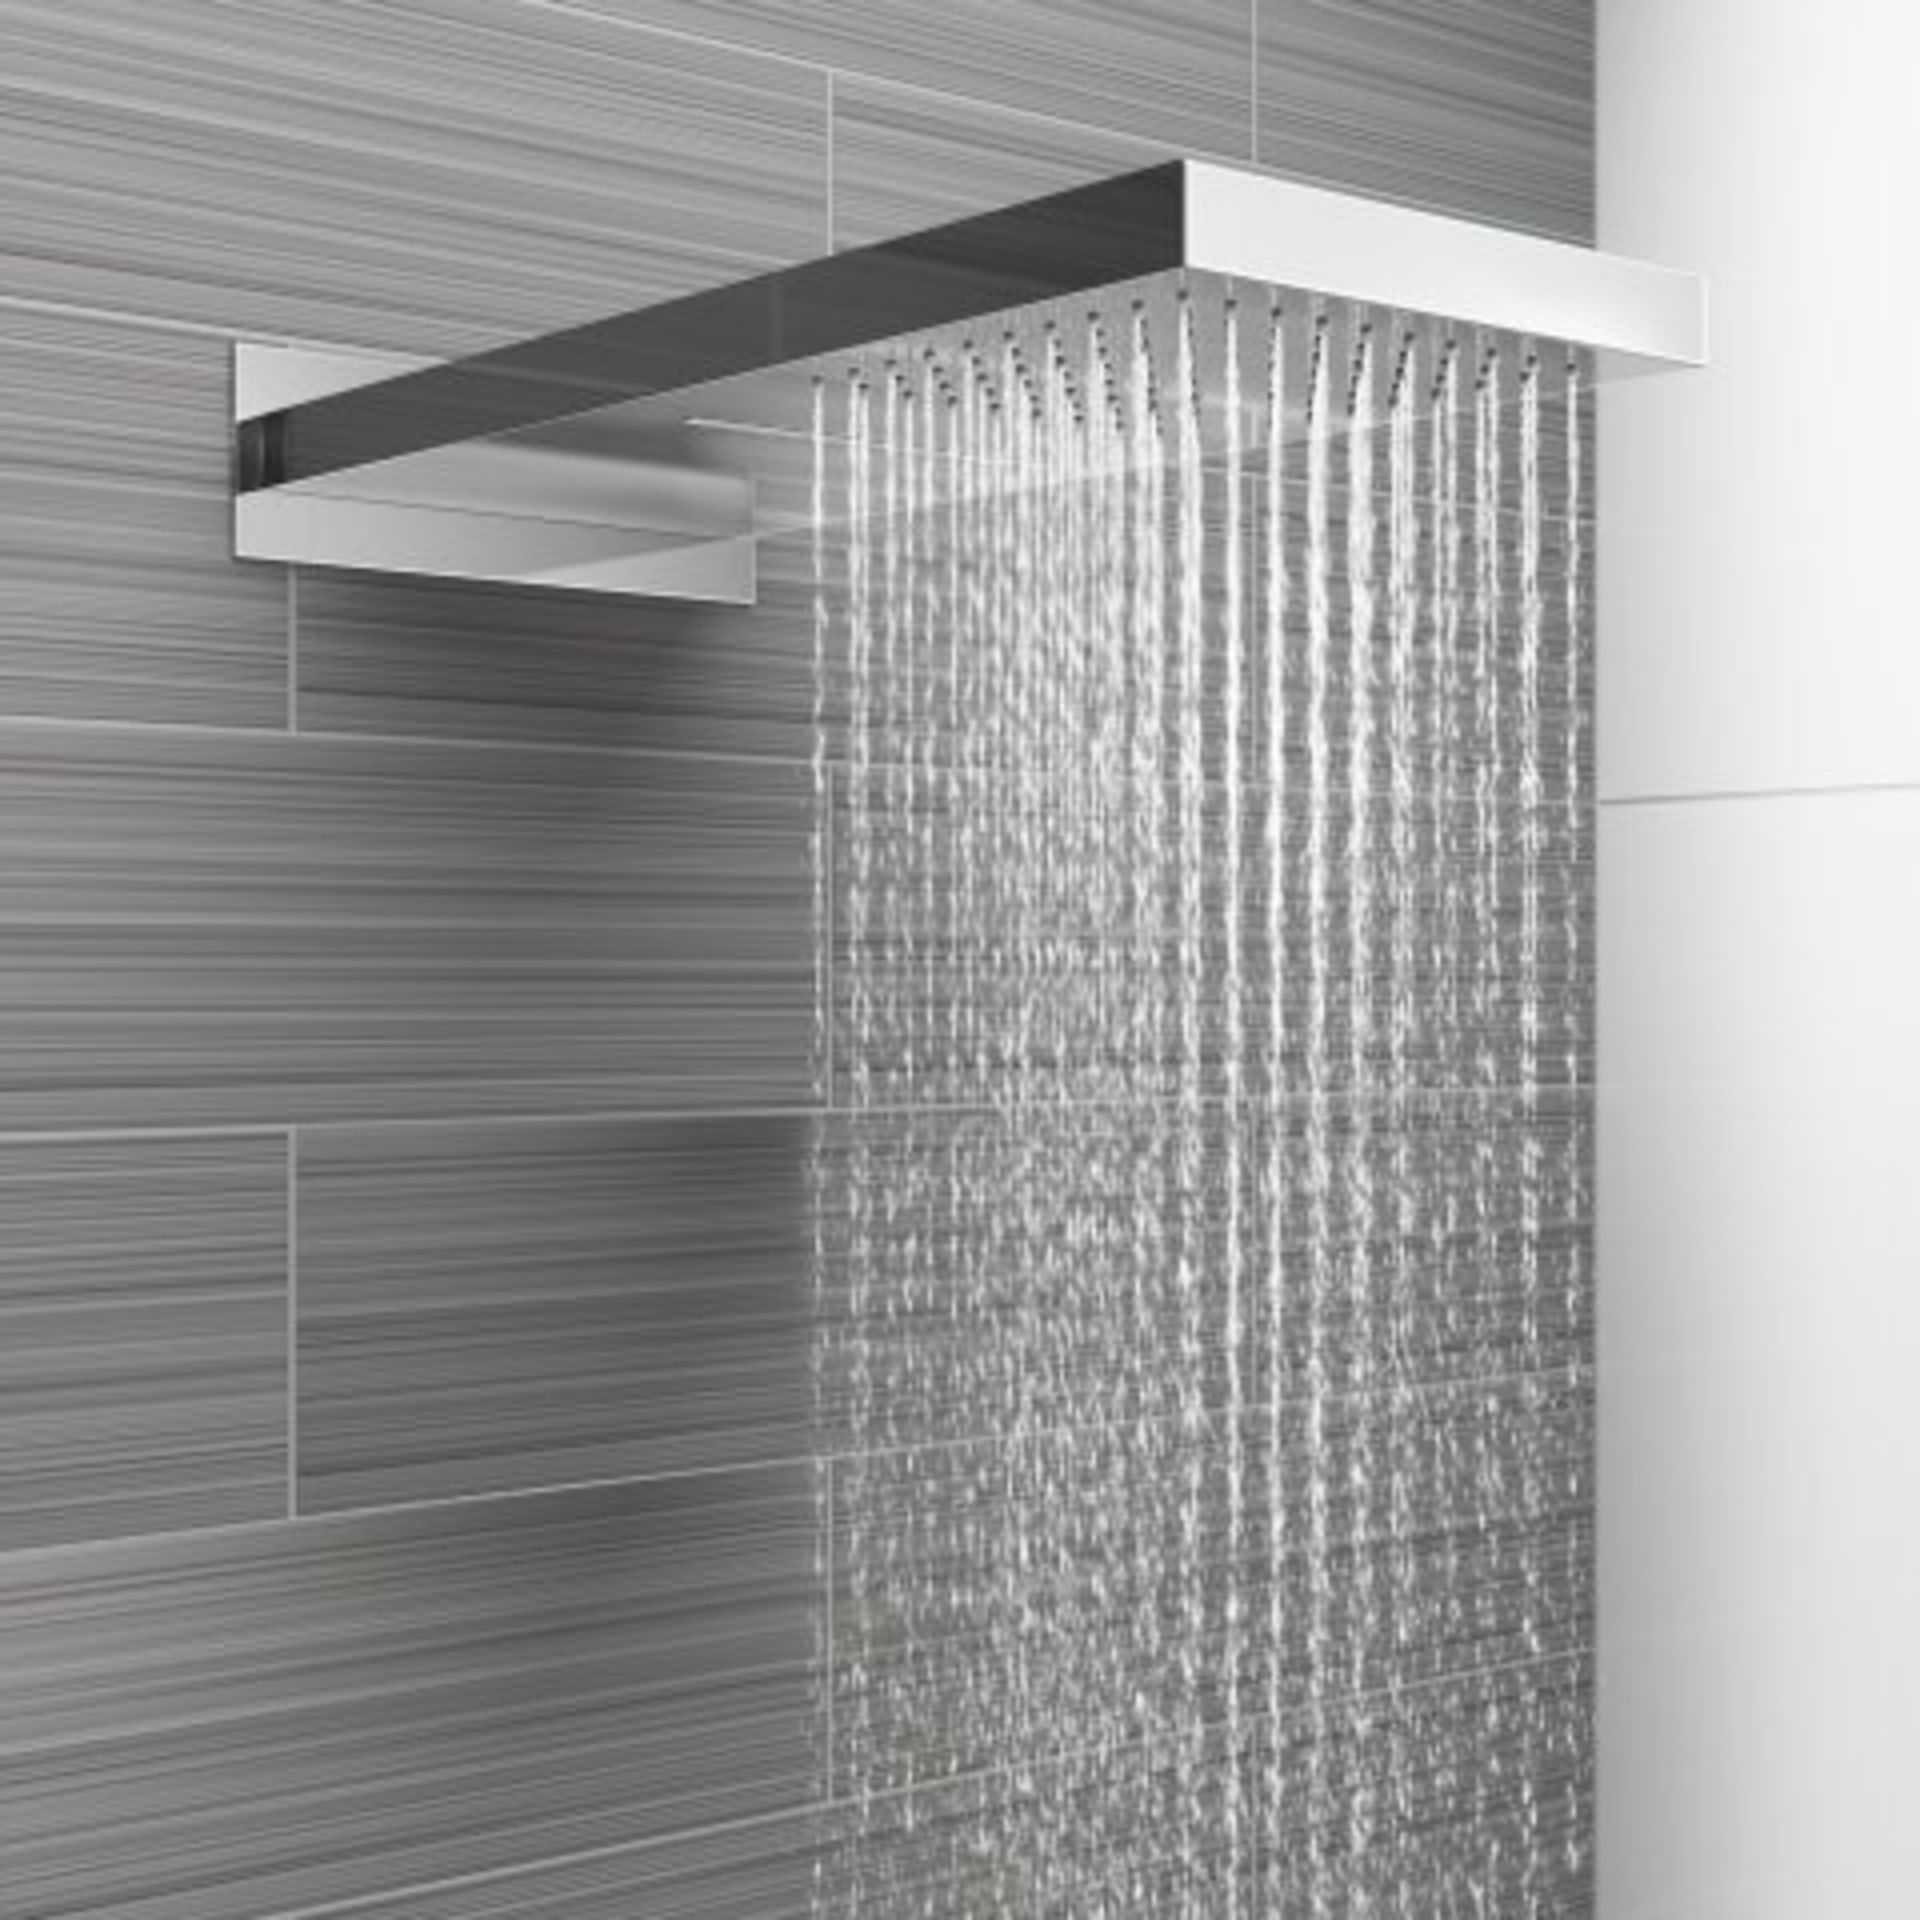 (J213) Stainless Steel 230x550mm Waterfall Shower Head. RRP £459.99. "What An Experience": Enjoy - Image 3 of 4